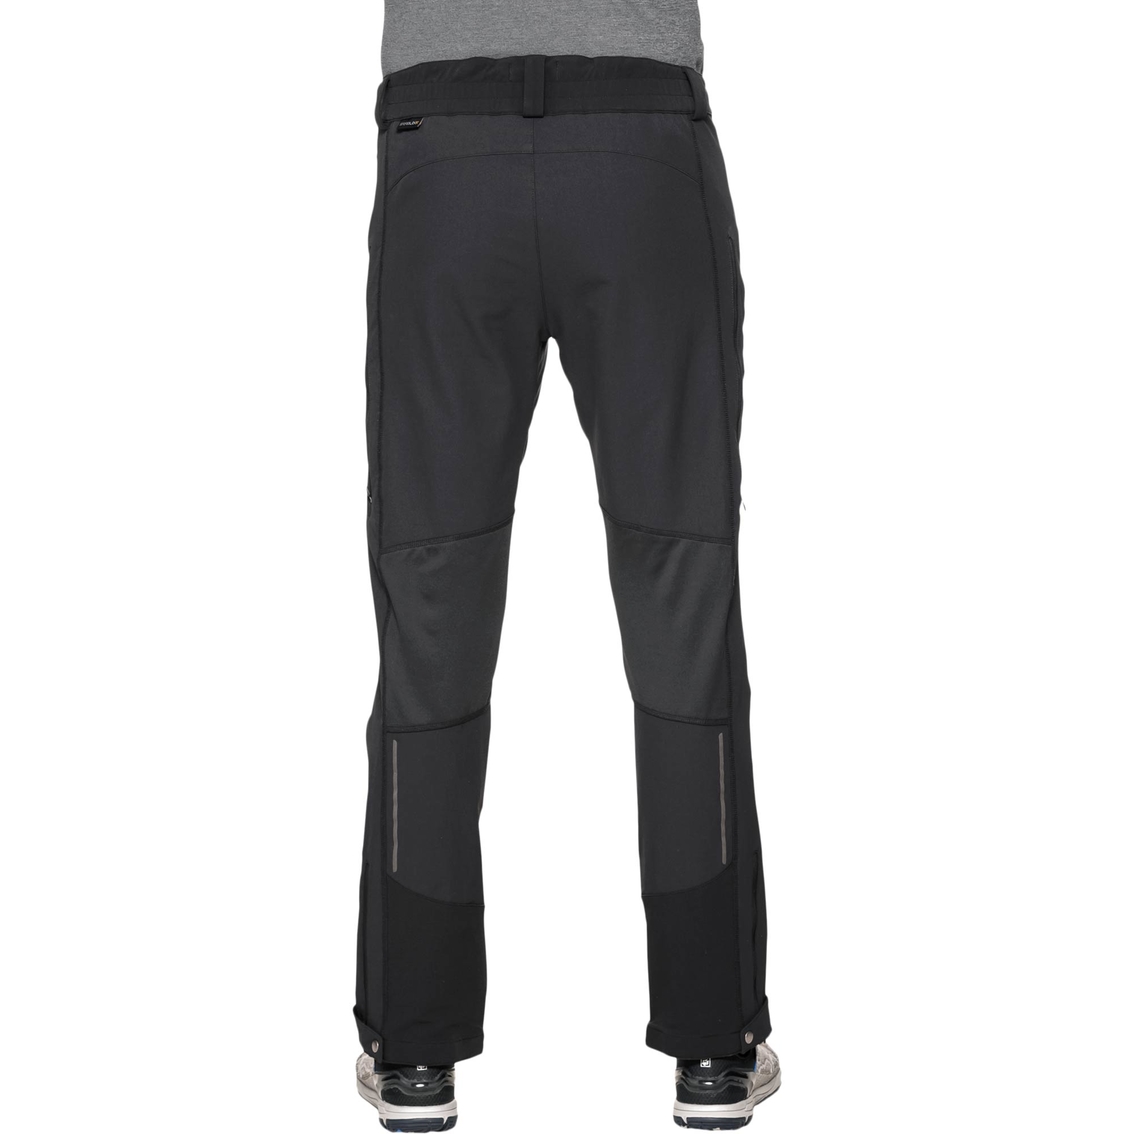 Jack Wolfskin Gravity Slope Pants | Pants | Clothing & Accessories | Shop  The Exchange